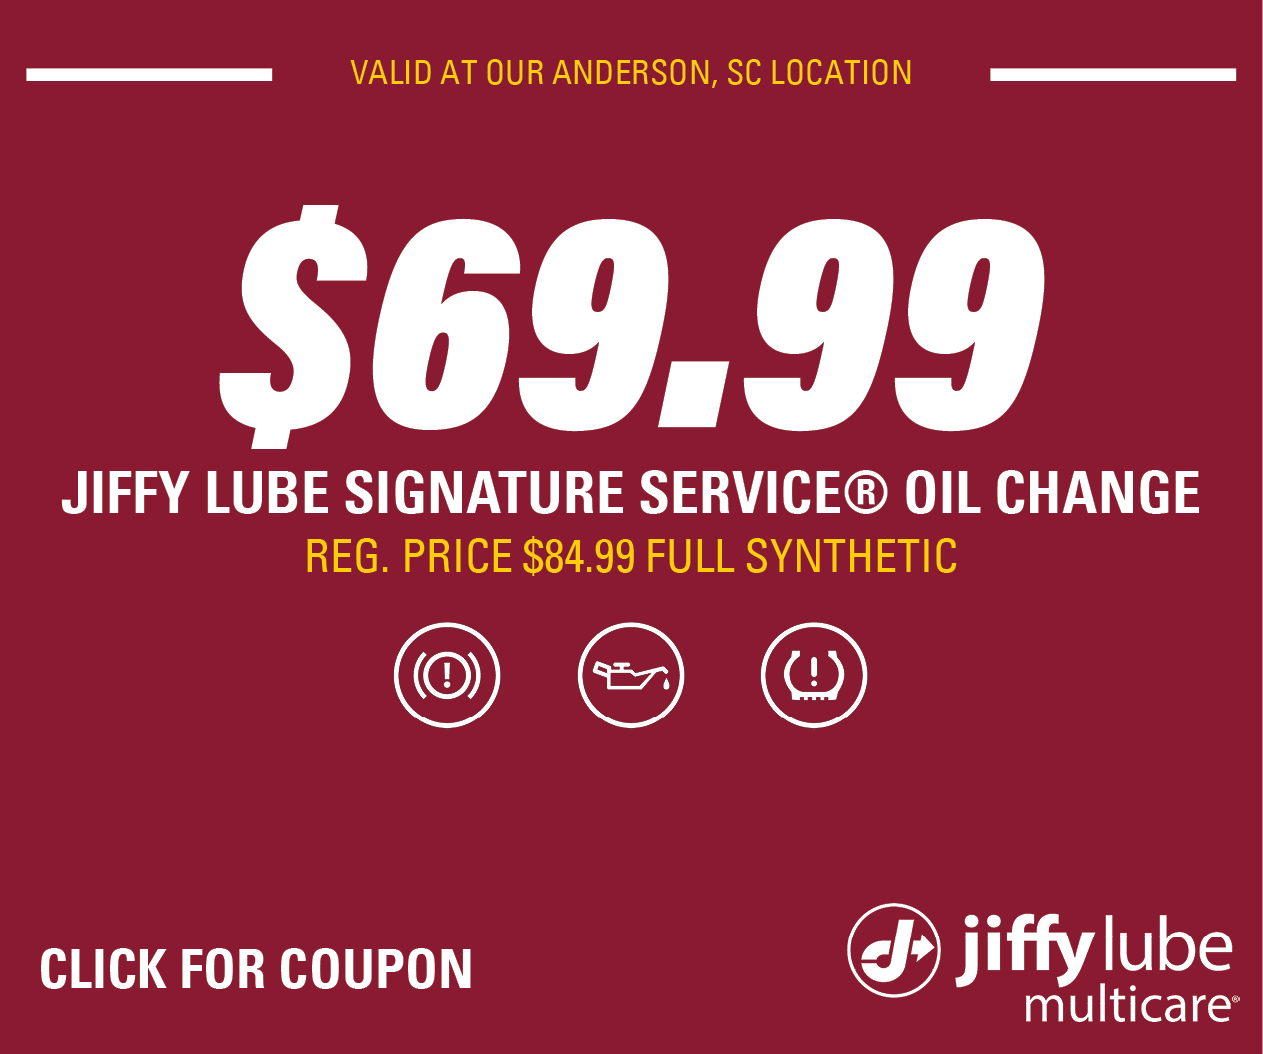 $69.99 Full Synthetic SSOC Anderson Website Image (Bronco Lube)